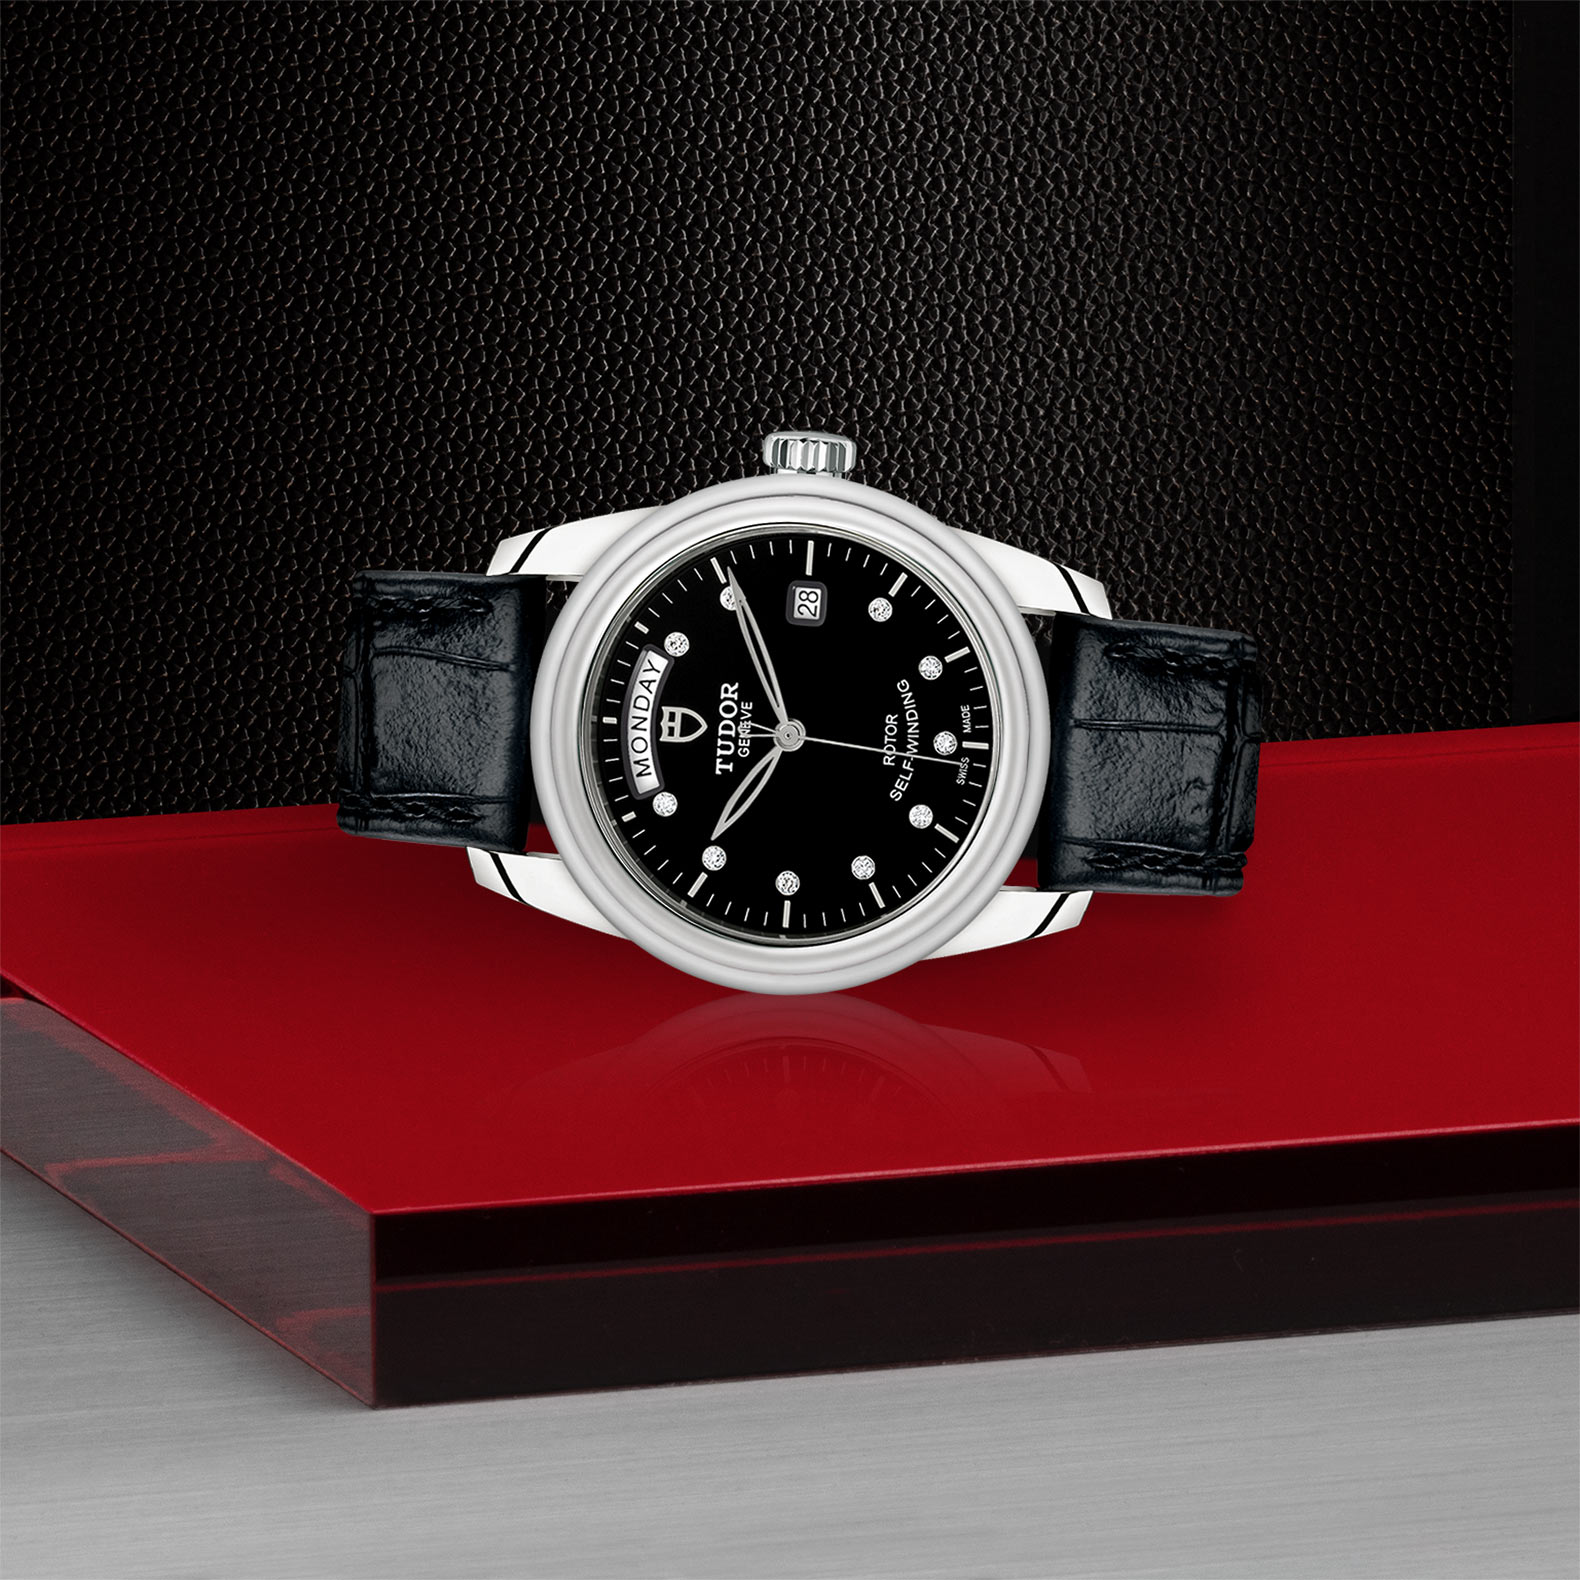 Tudor Glamour Date+Day M56000-0049